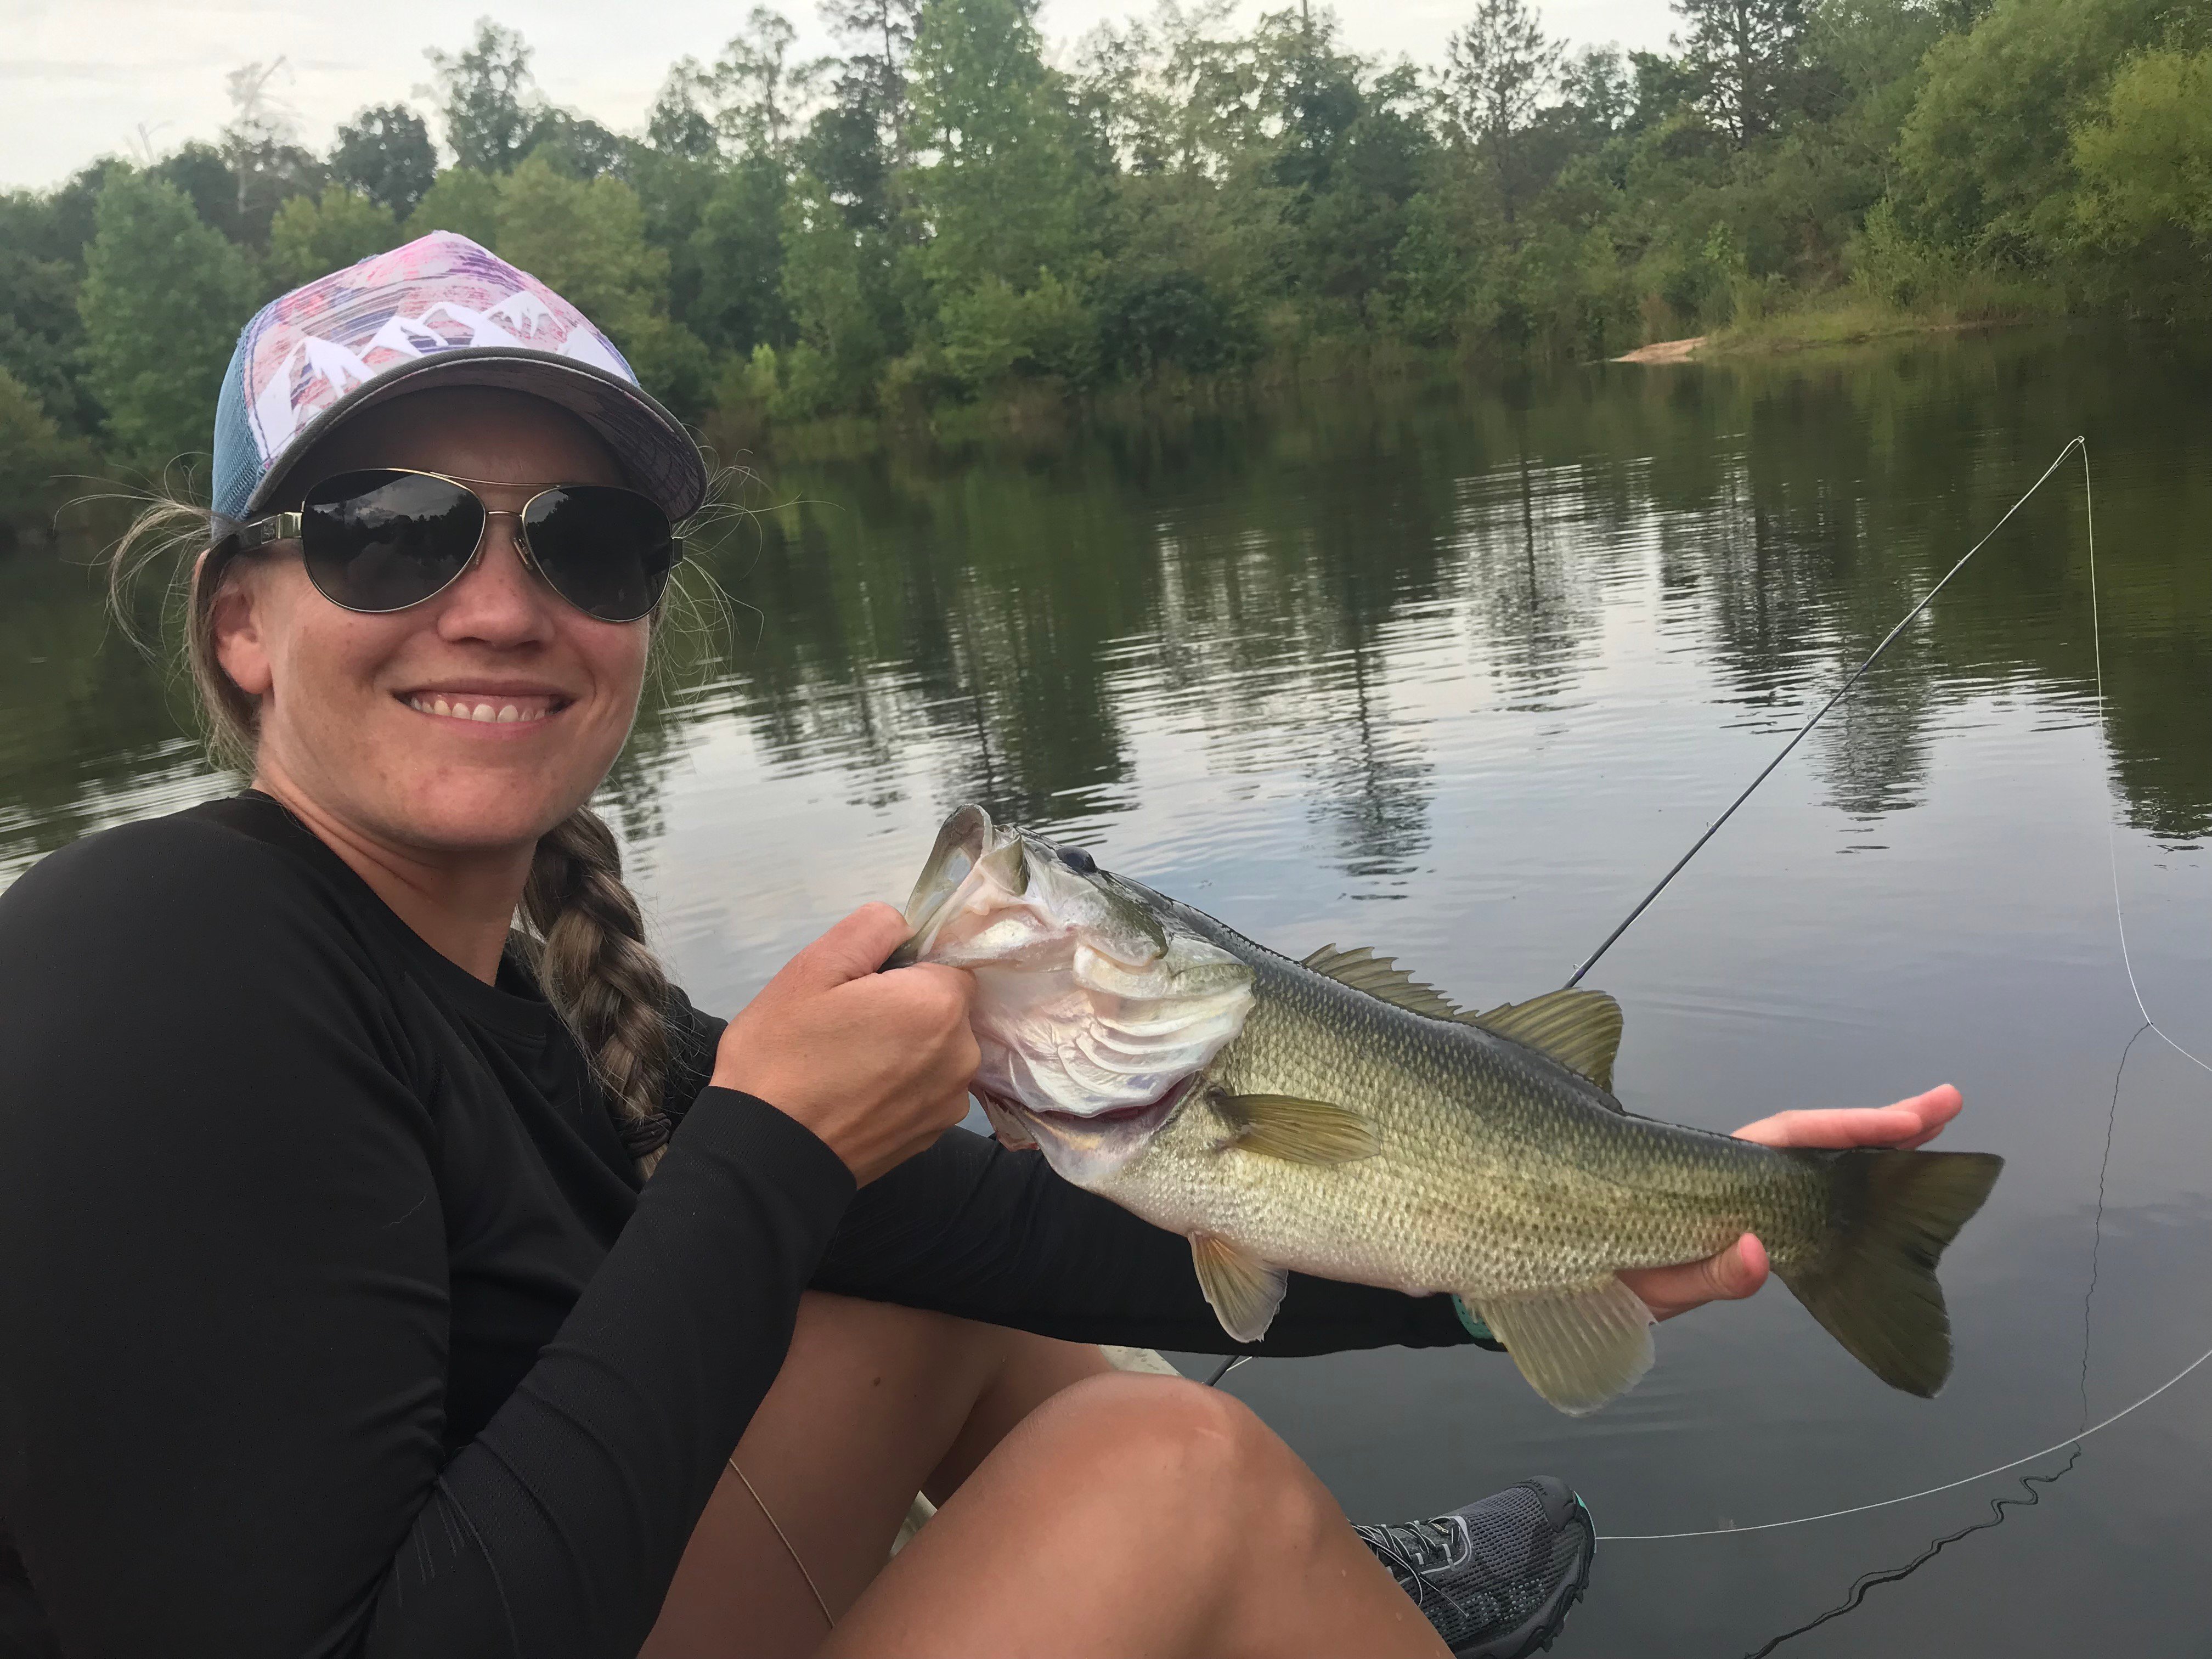 How To Get Started Fishing: An Interview with Anastasia Patterson